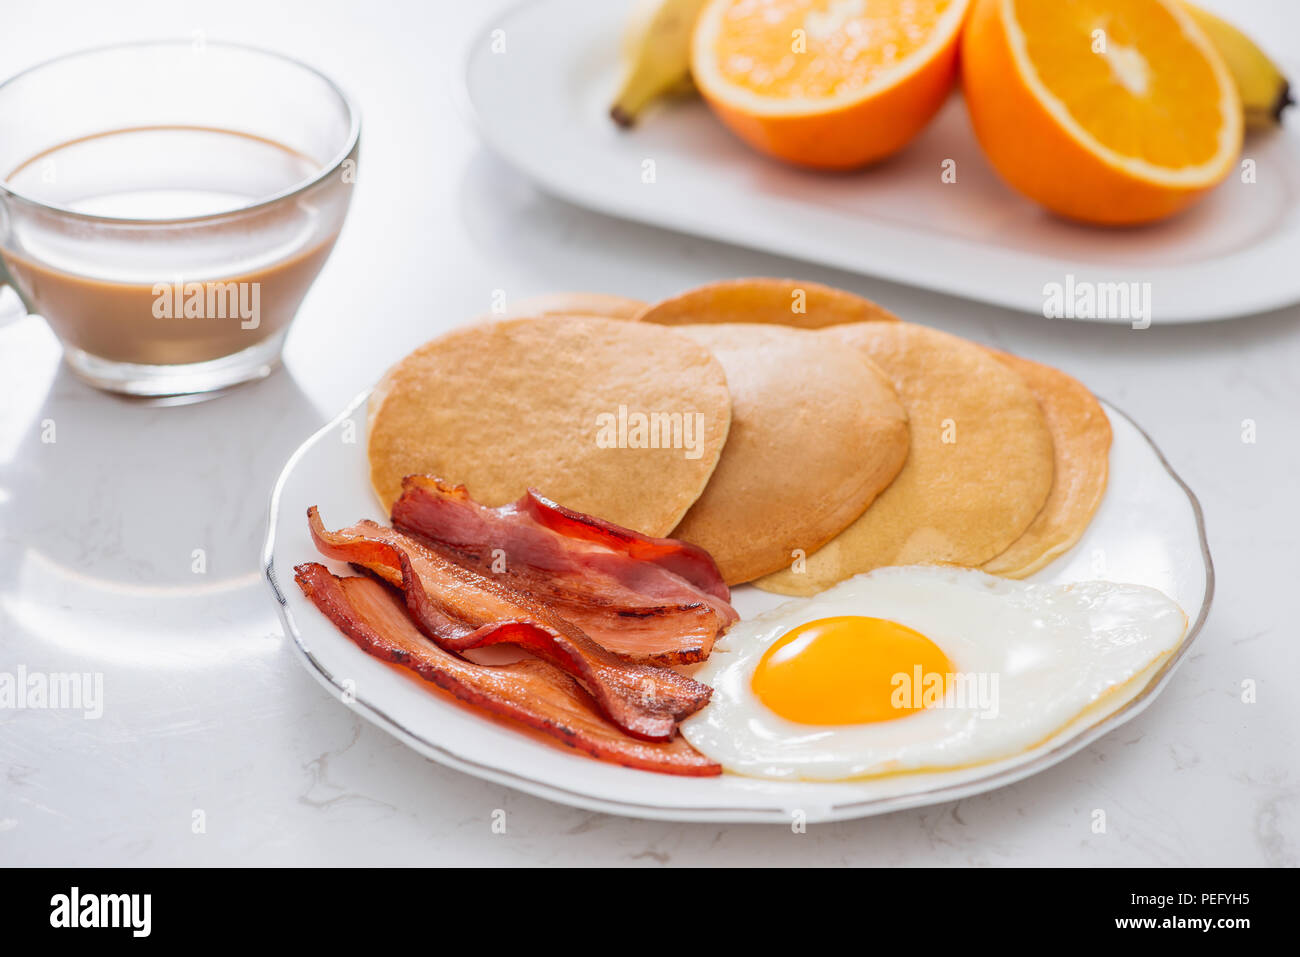 Healthy Full American Breakfast with Eggs Bacon and Pancakes Stock Photo